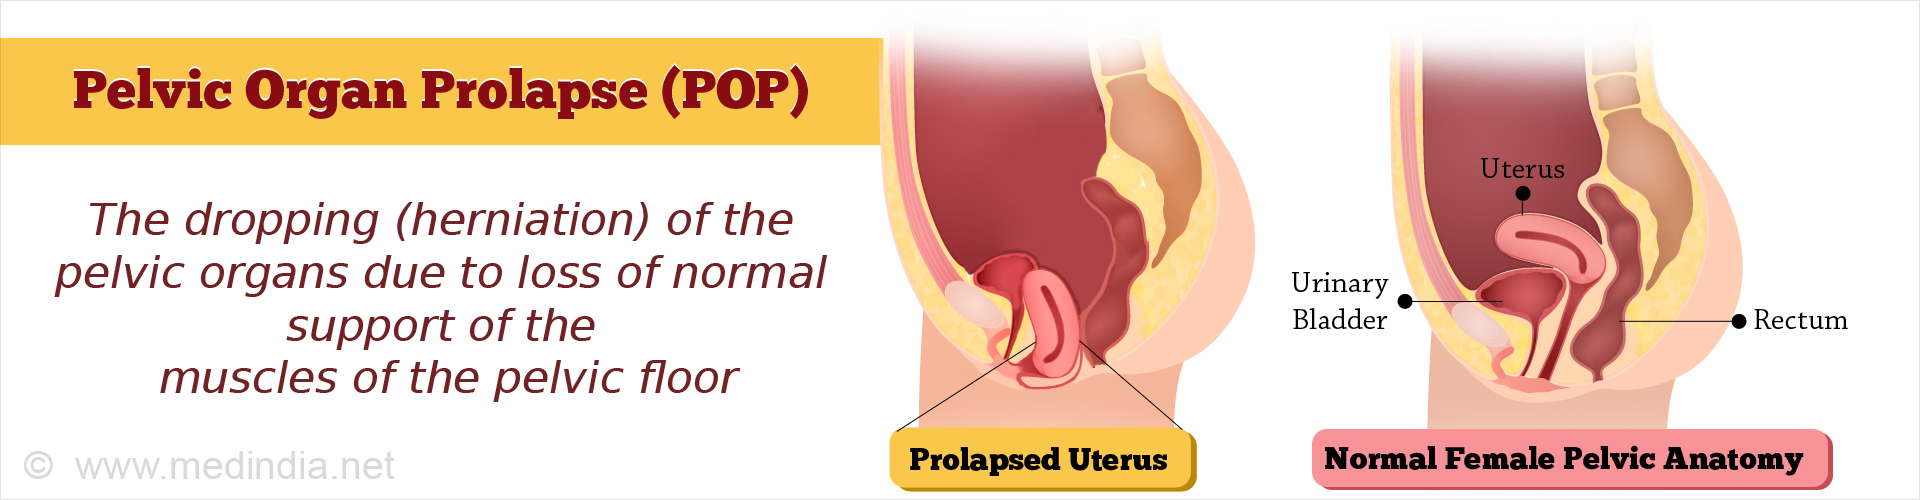 Pelvic Organ Prolapse (POP) - The dropping (herniation) of the pelvic organs due to loss of normal support of the muscles of the pelvic floor
